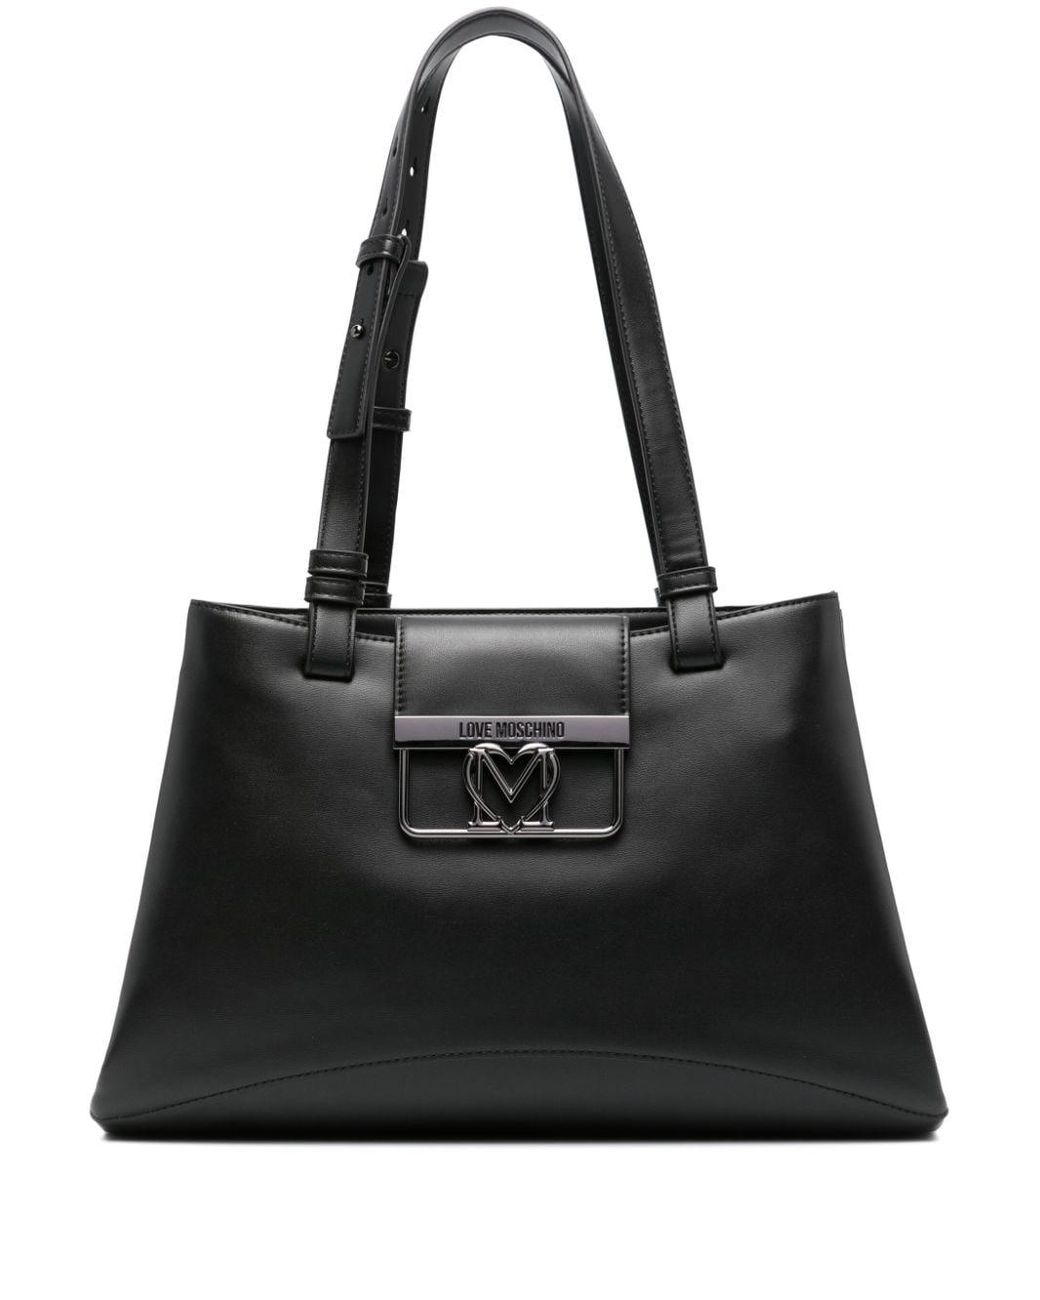 Love Moschino Large Heart Plaque Shoulder Bag in Black | Lyst